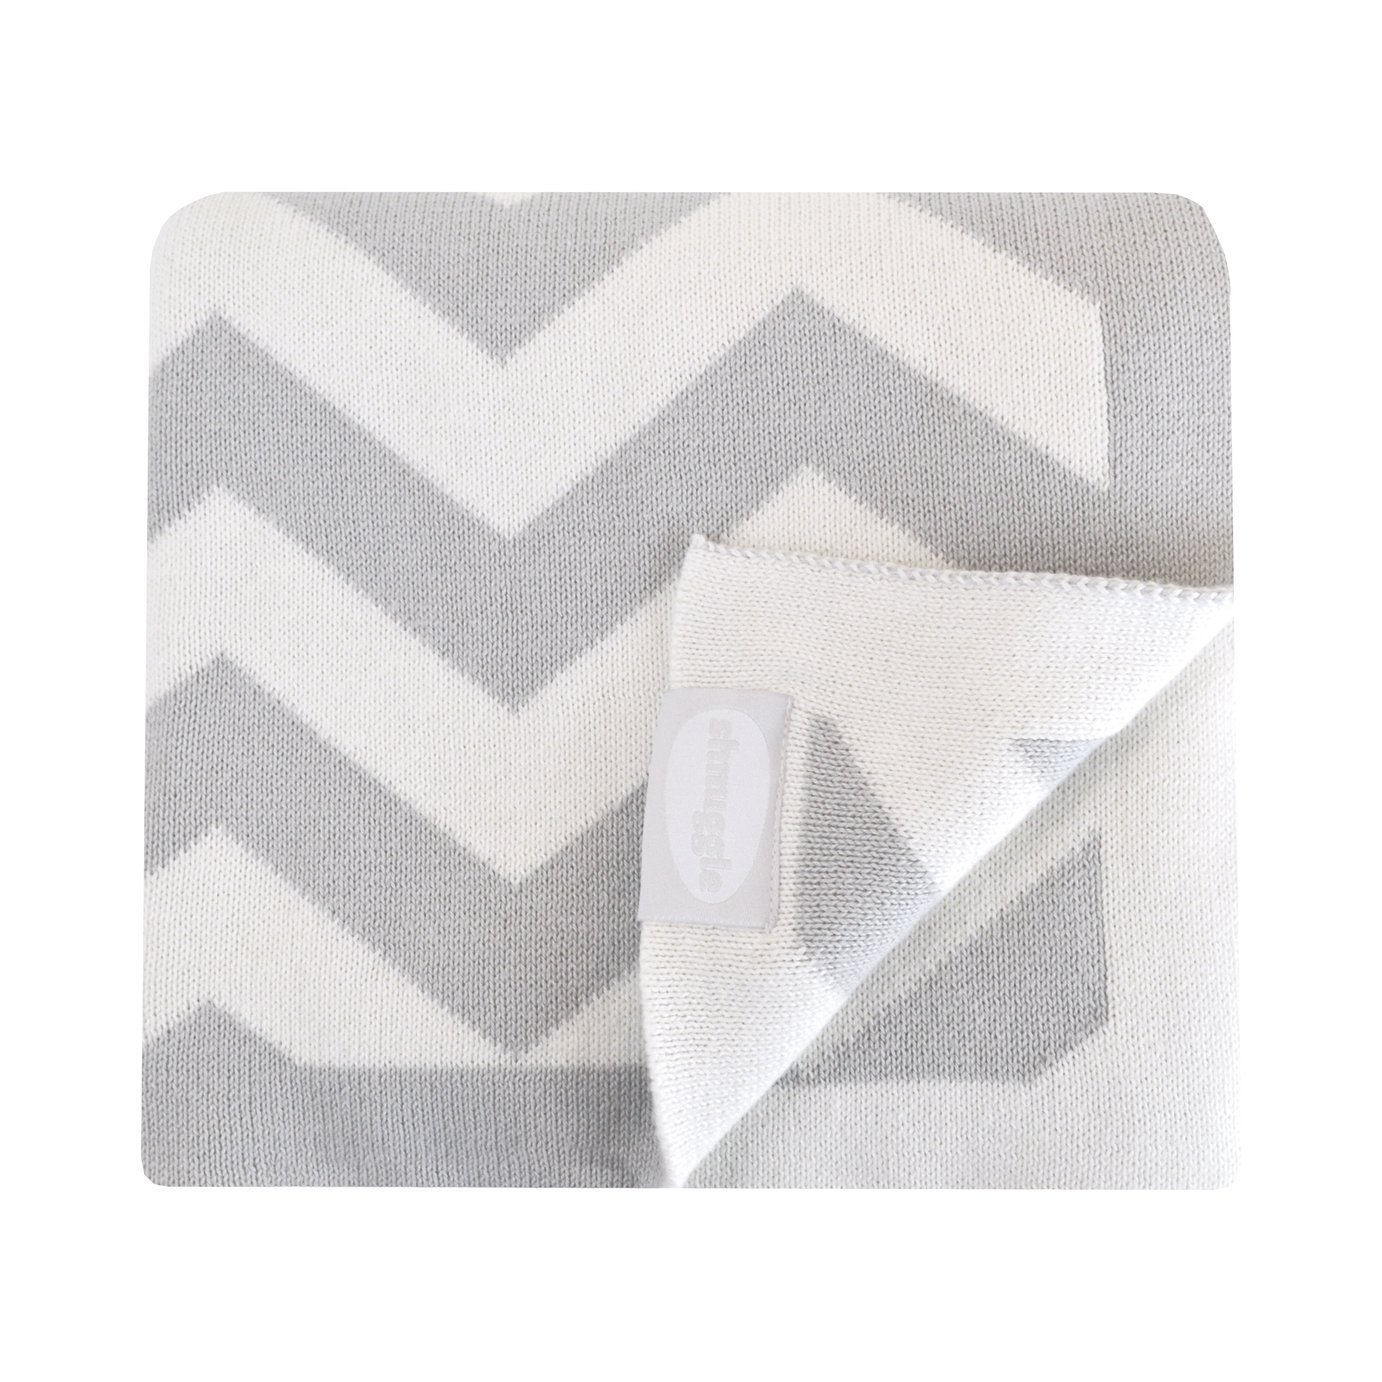 Baby blankets and quilts | Argos